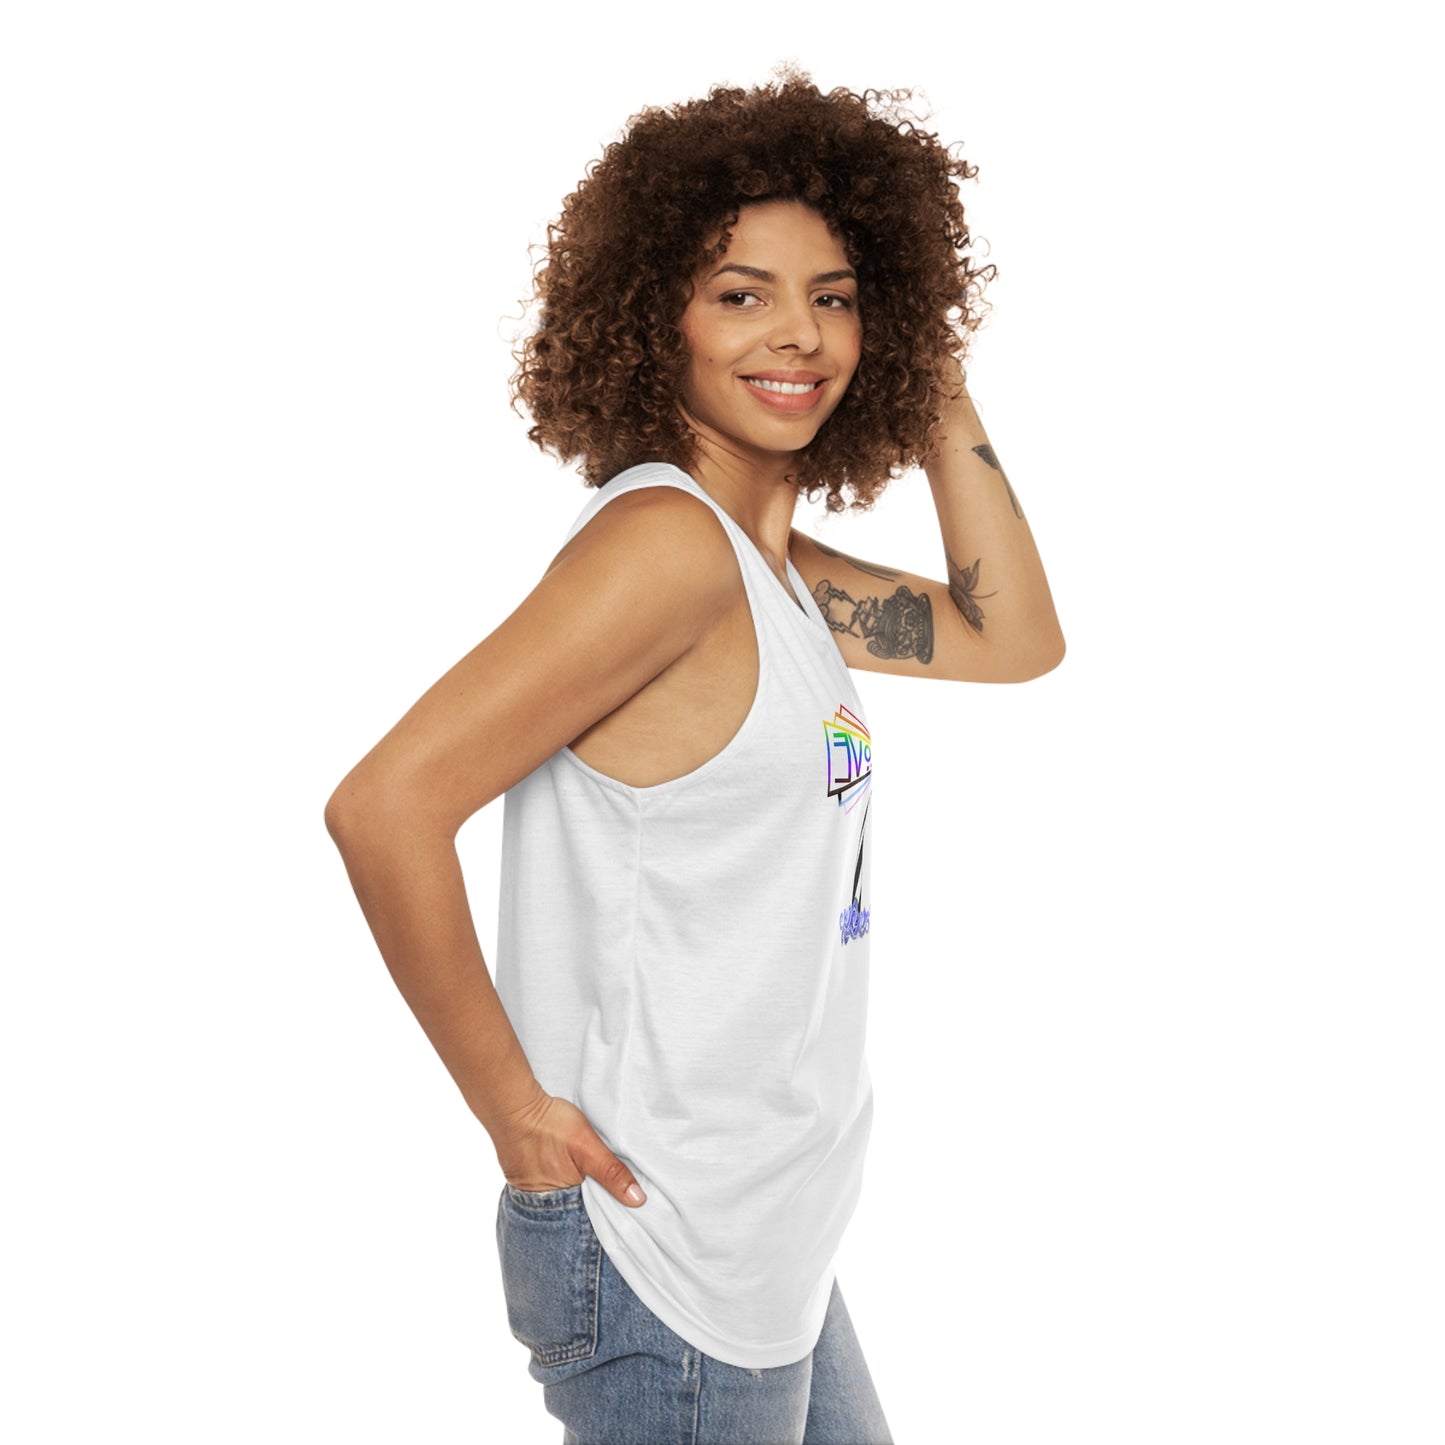 Be a Lighthouse - Unisex Tank Top